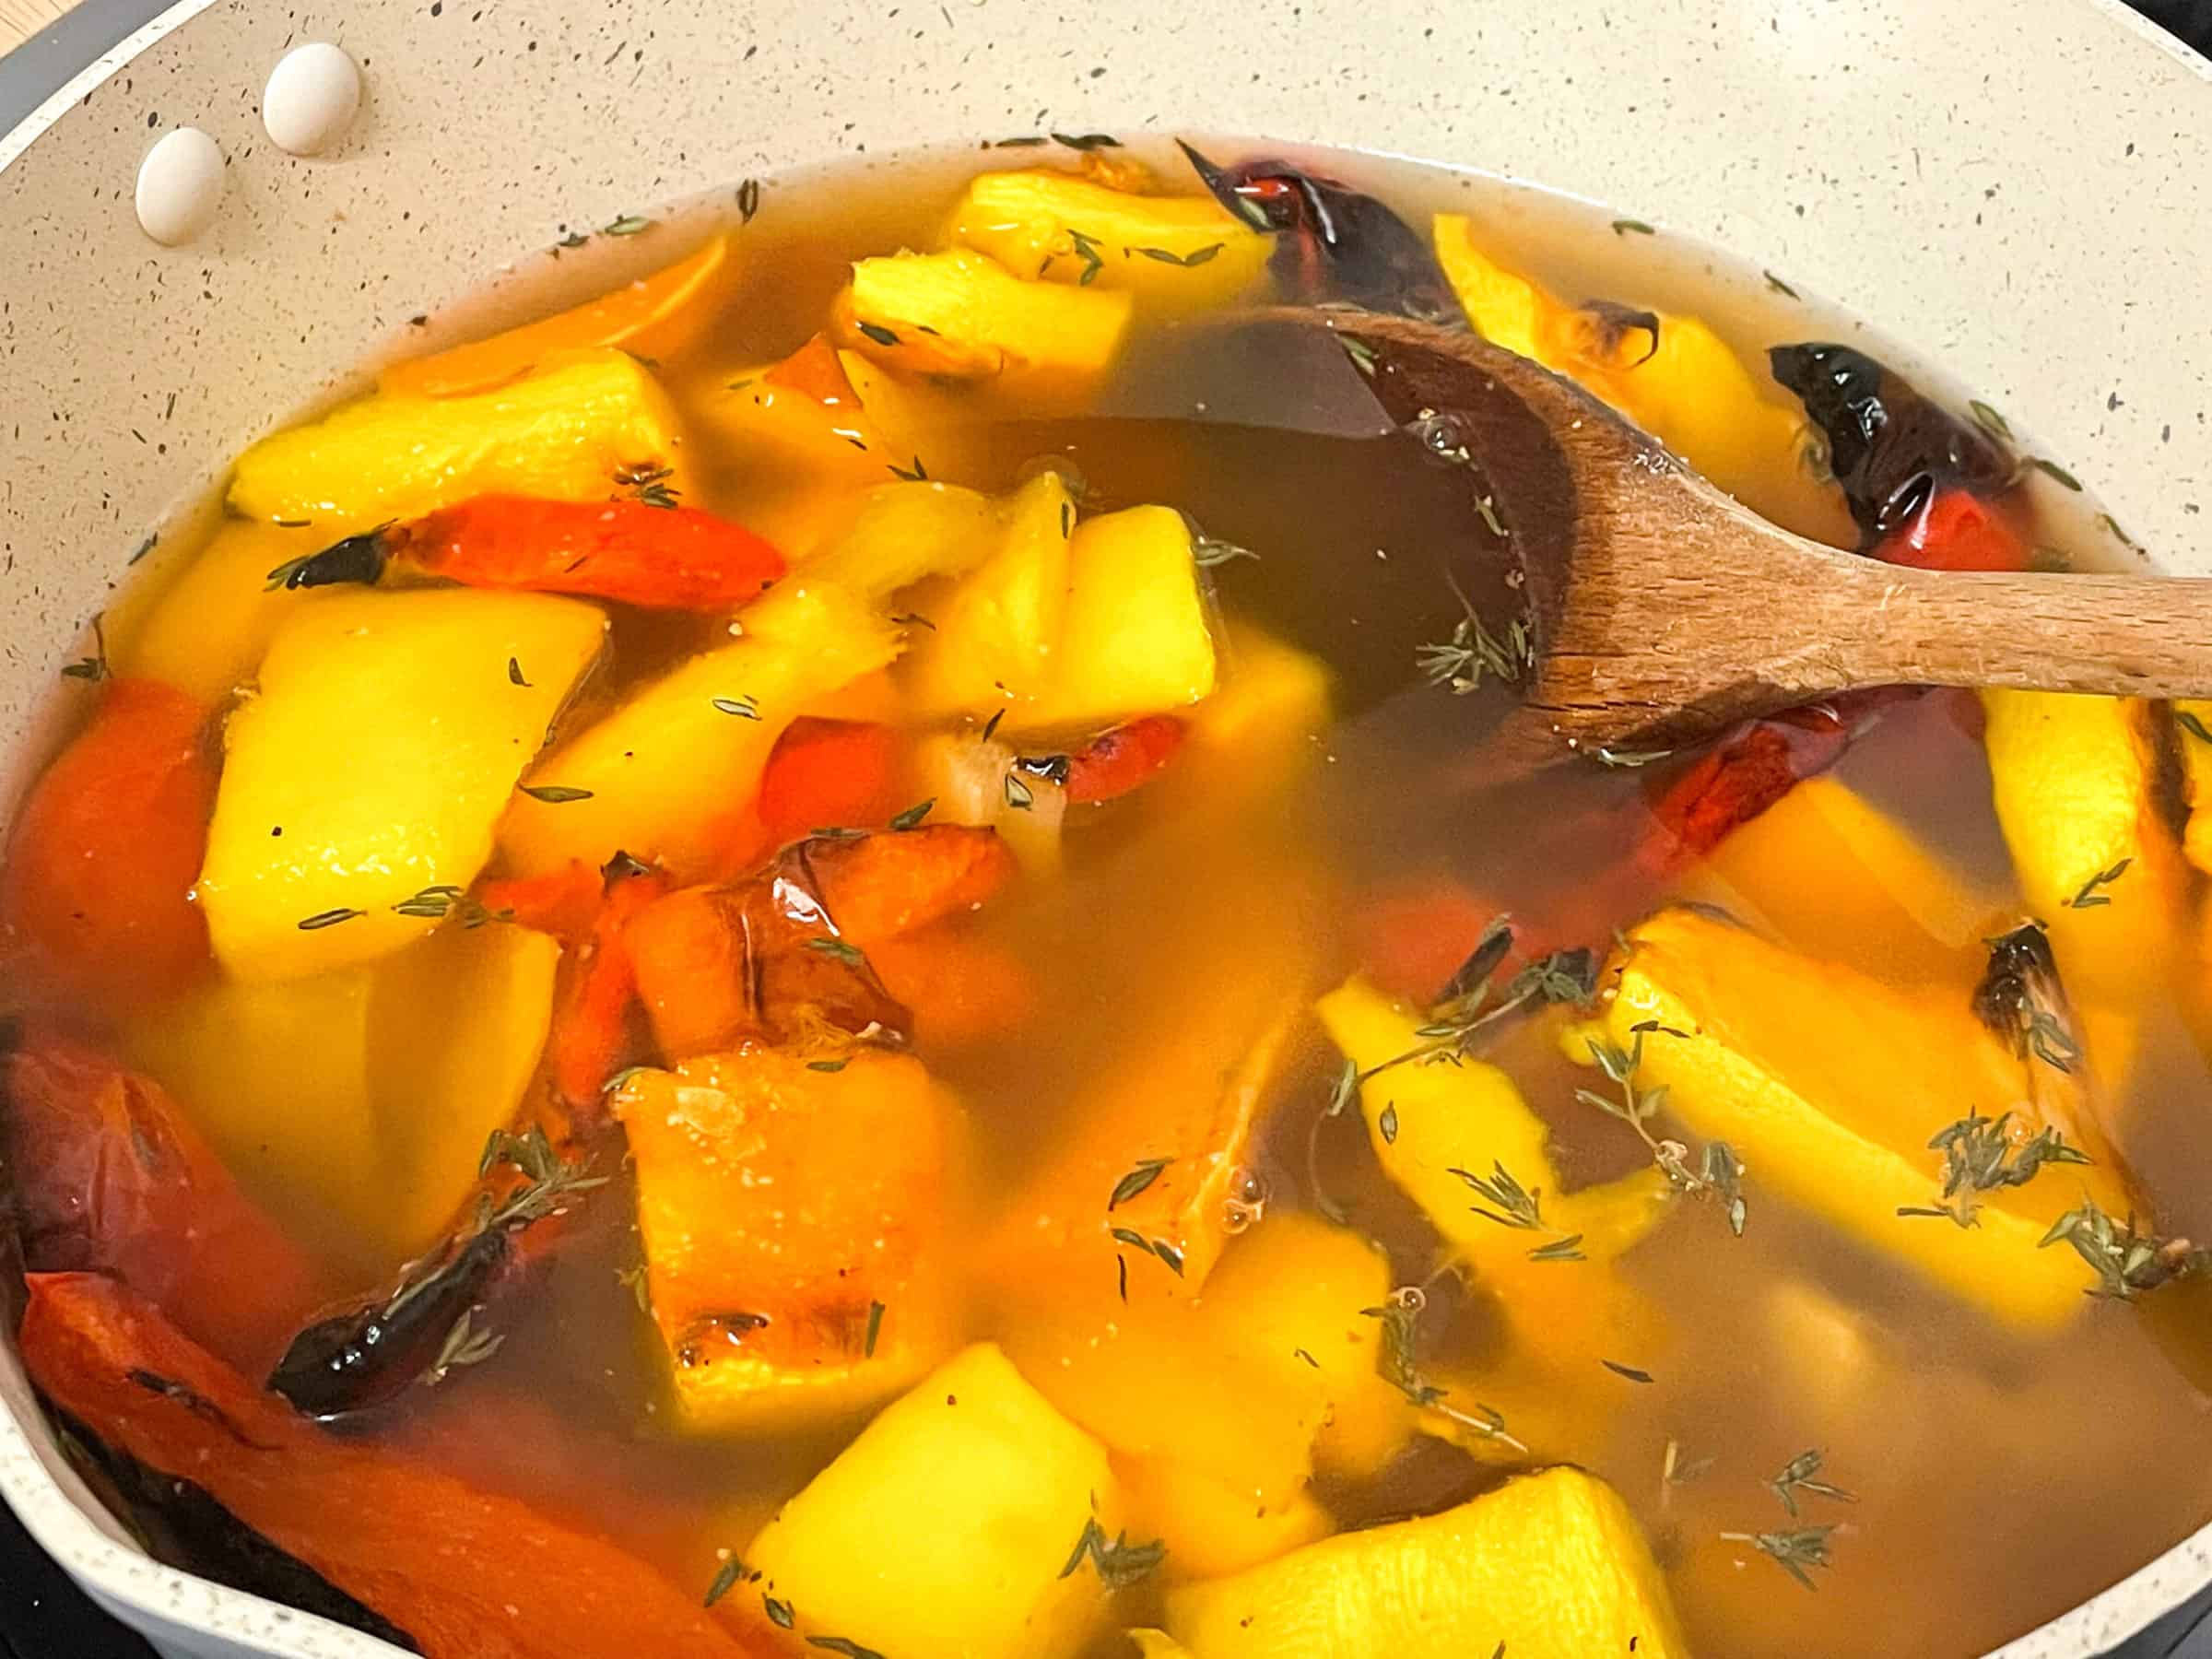 Roasted veggies added to soup pan along with veggie stock, wooden spoon to side.